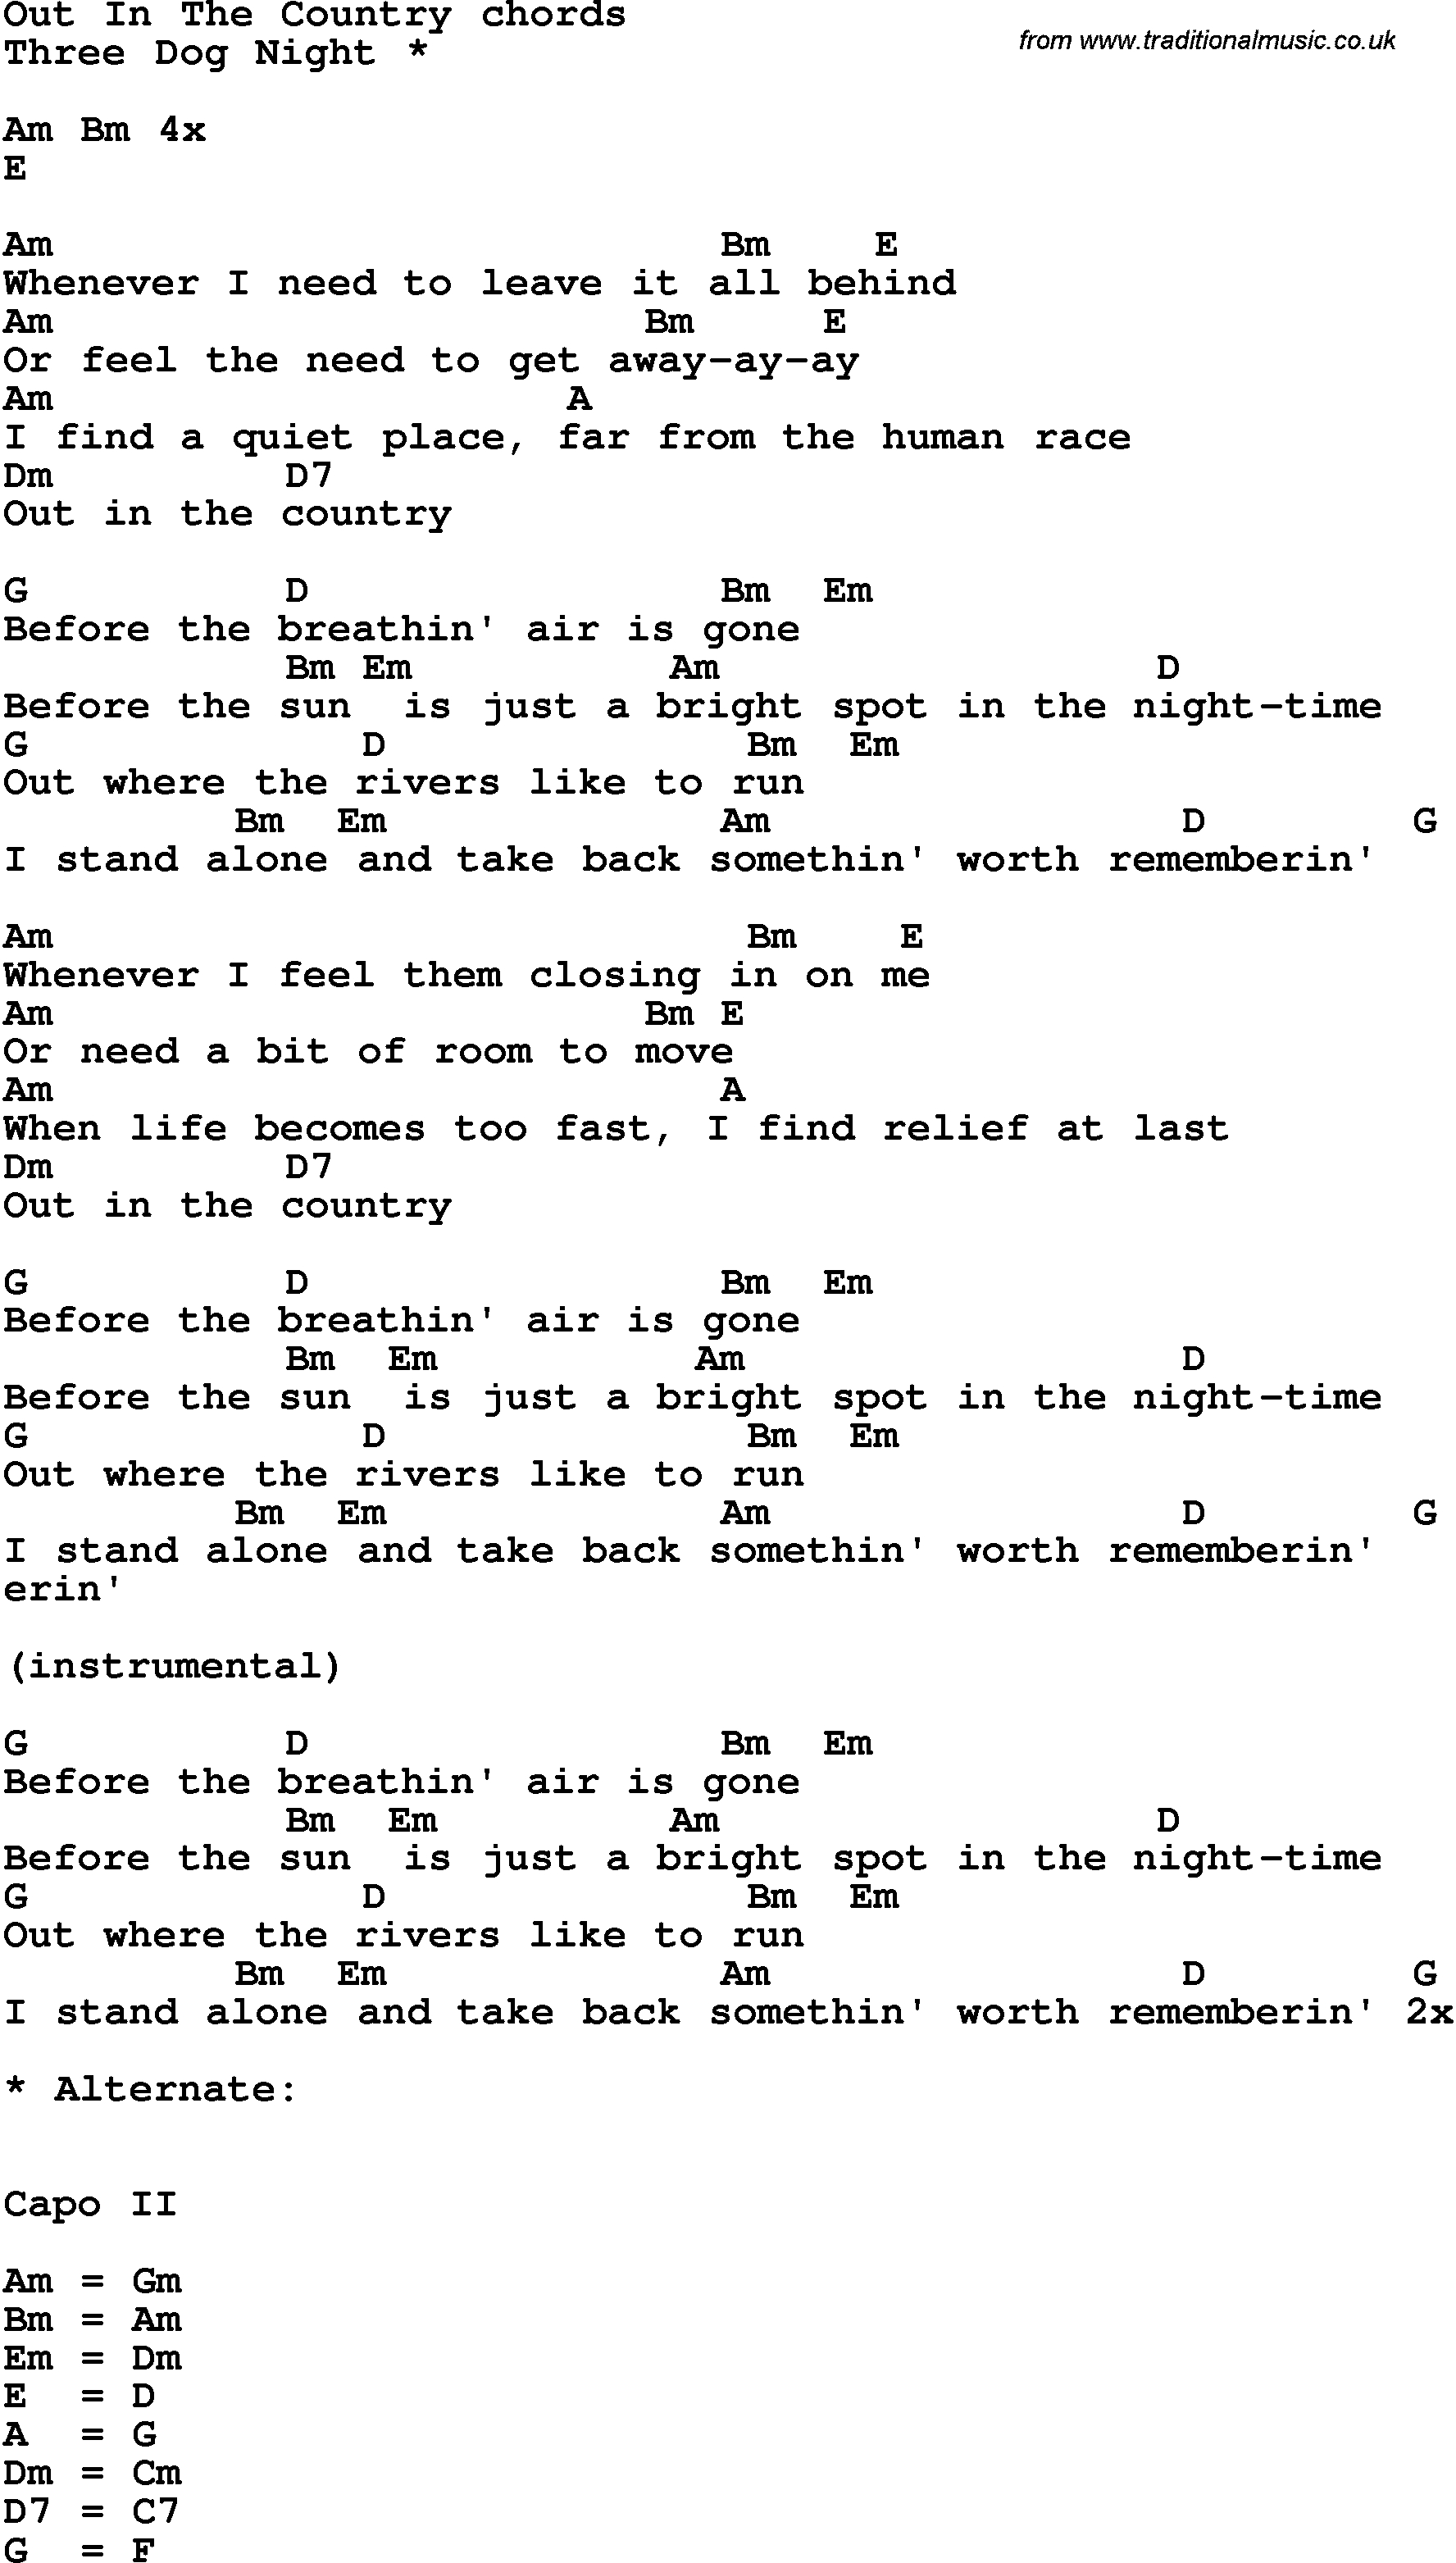 Country Roads Chords Song Lyrics With Guitar Chords For Out In The Country